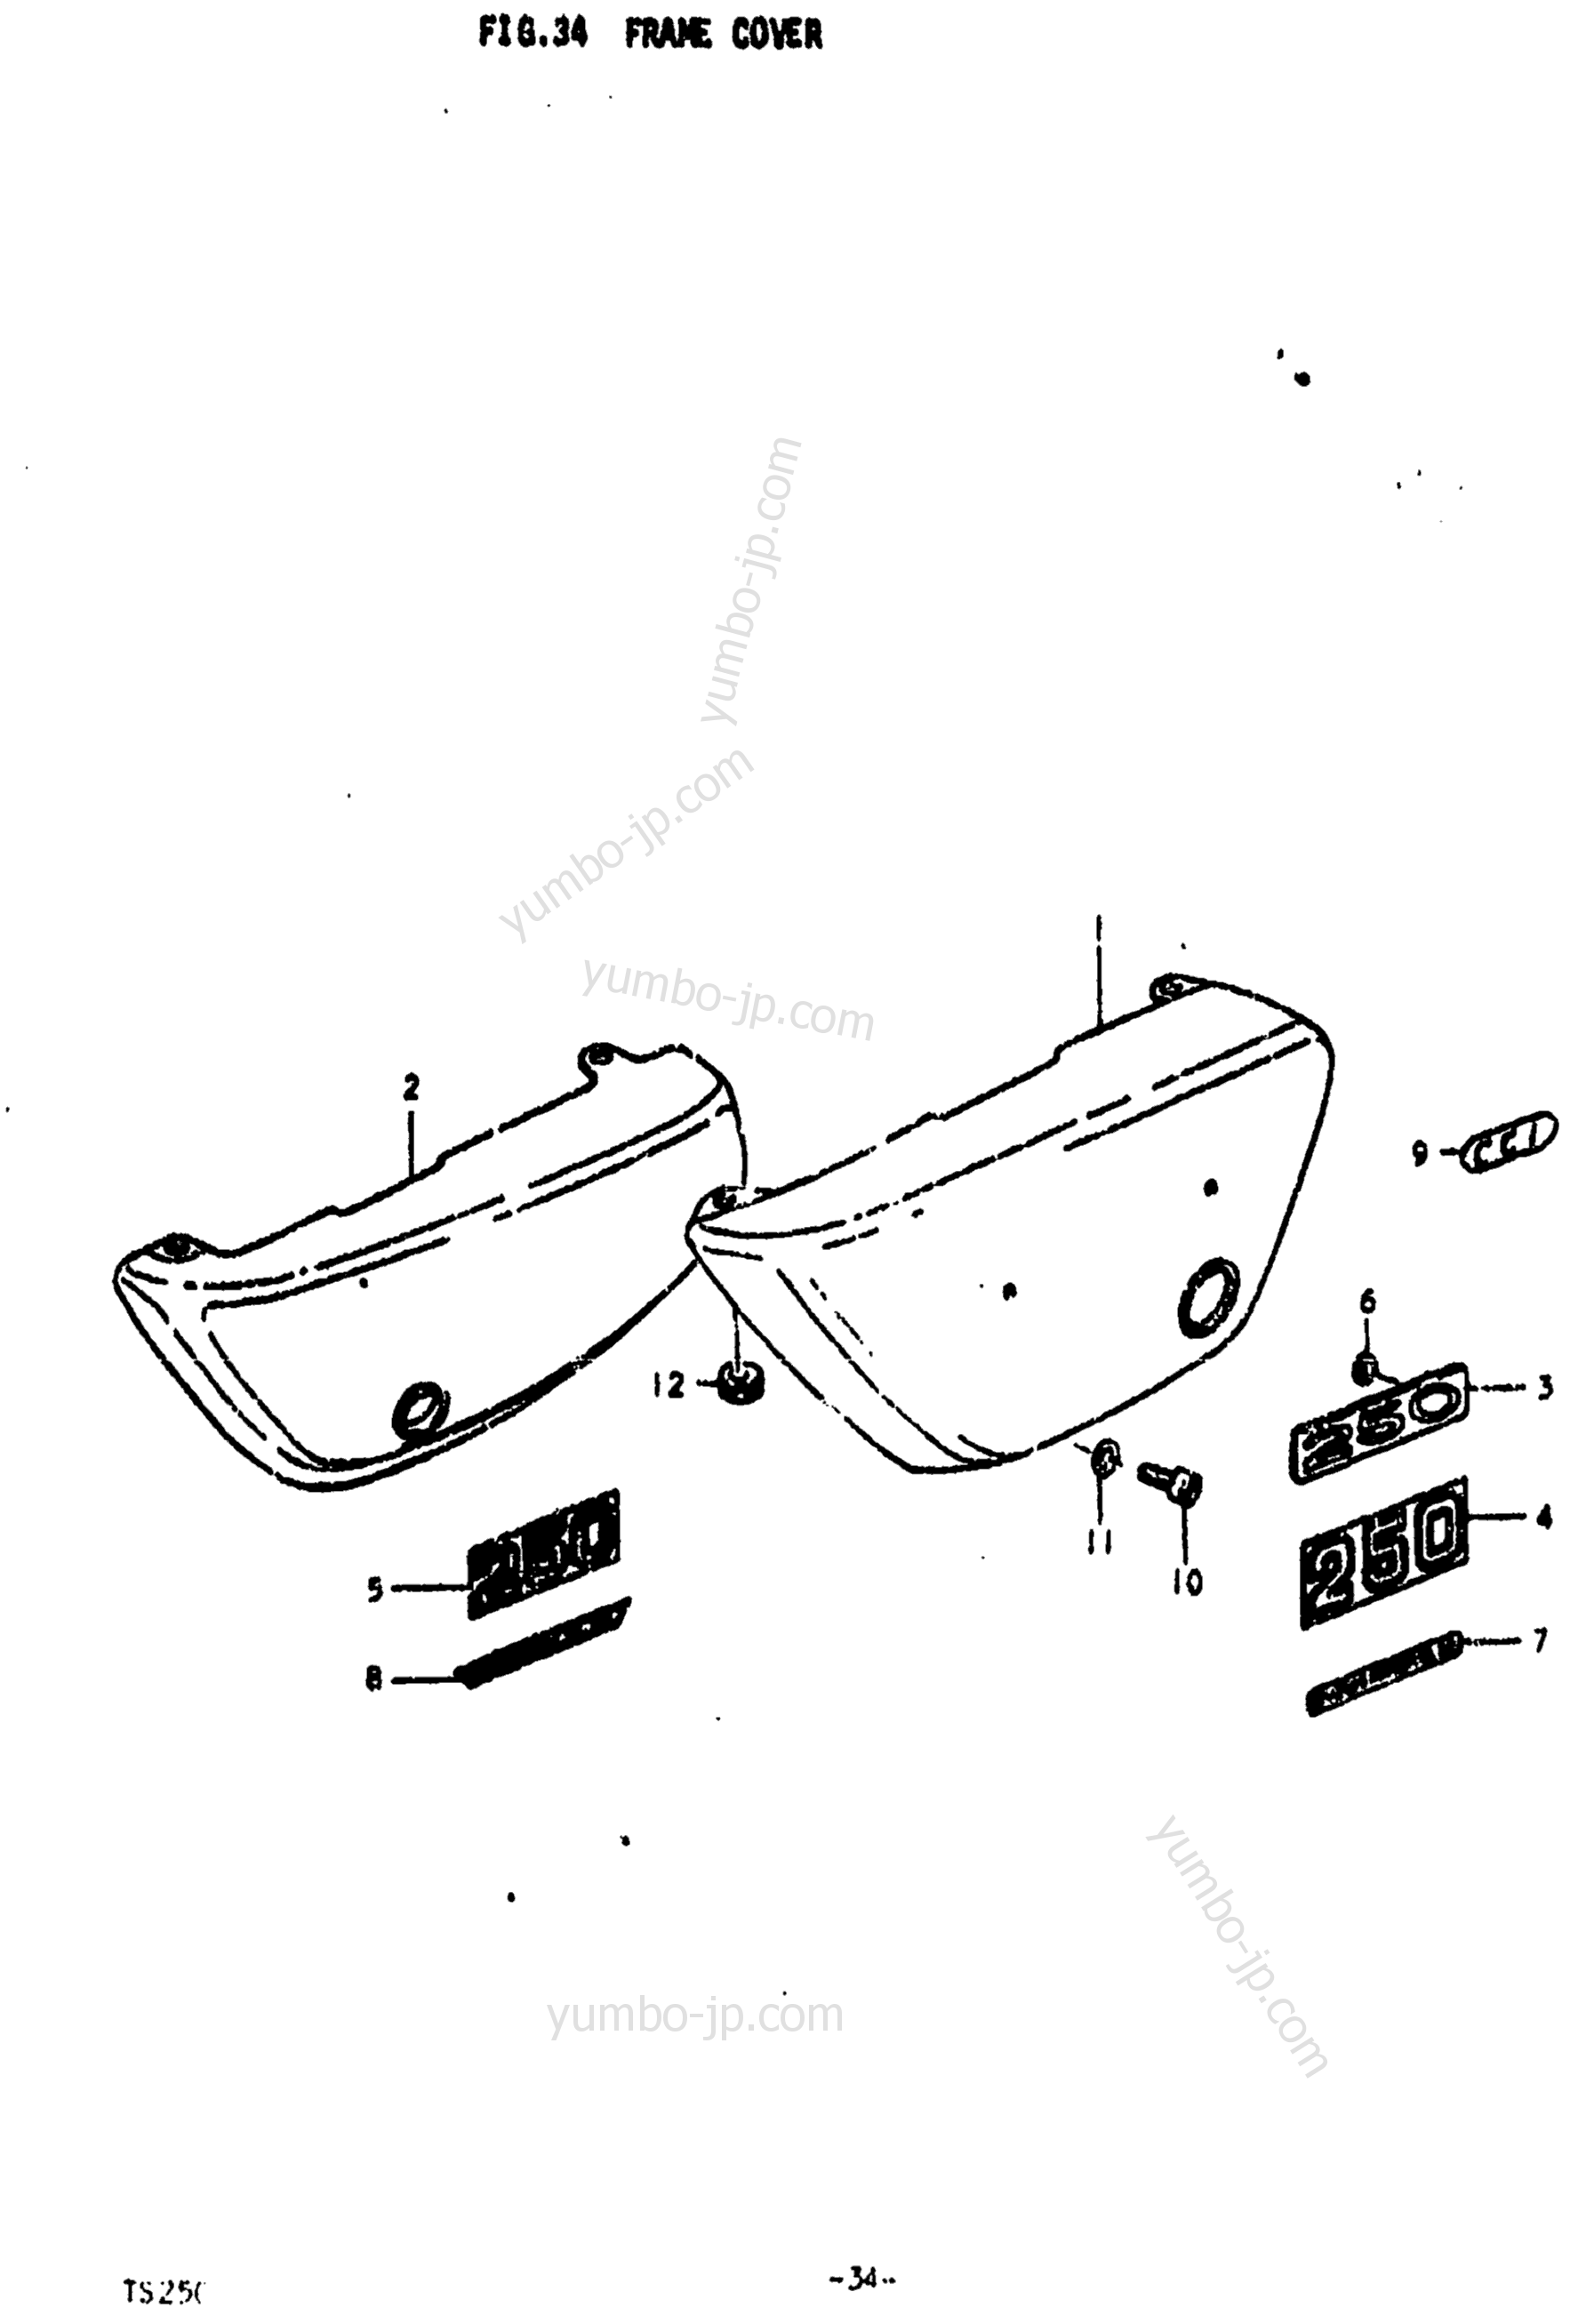 FRAME COVER for motorcycles SUZUKI TS250 1974 year